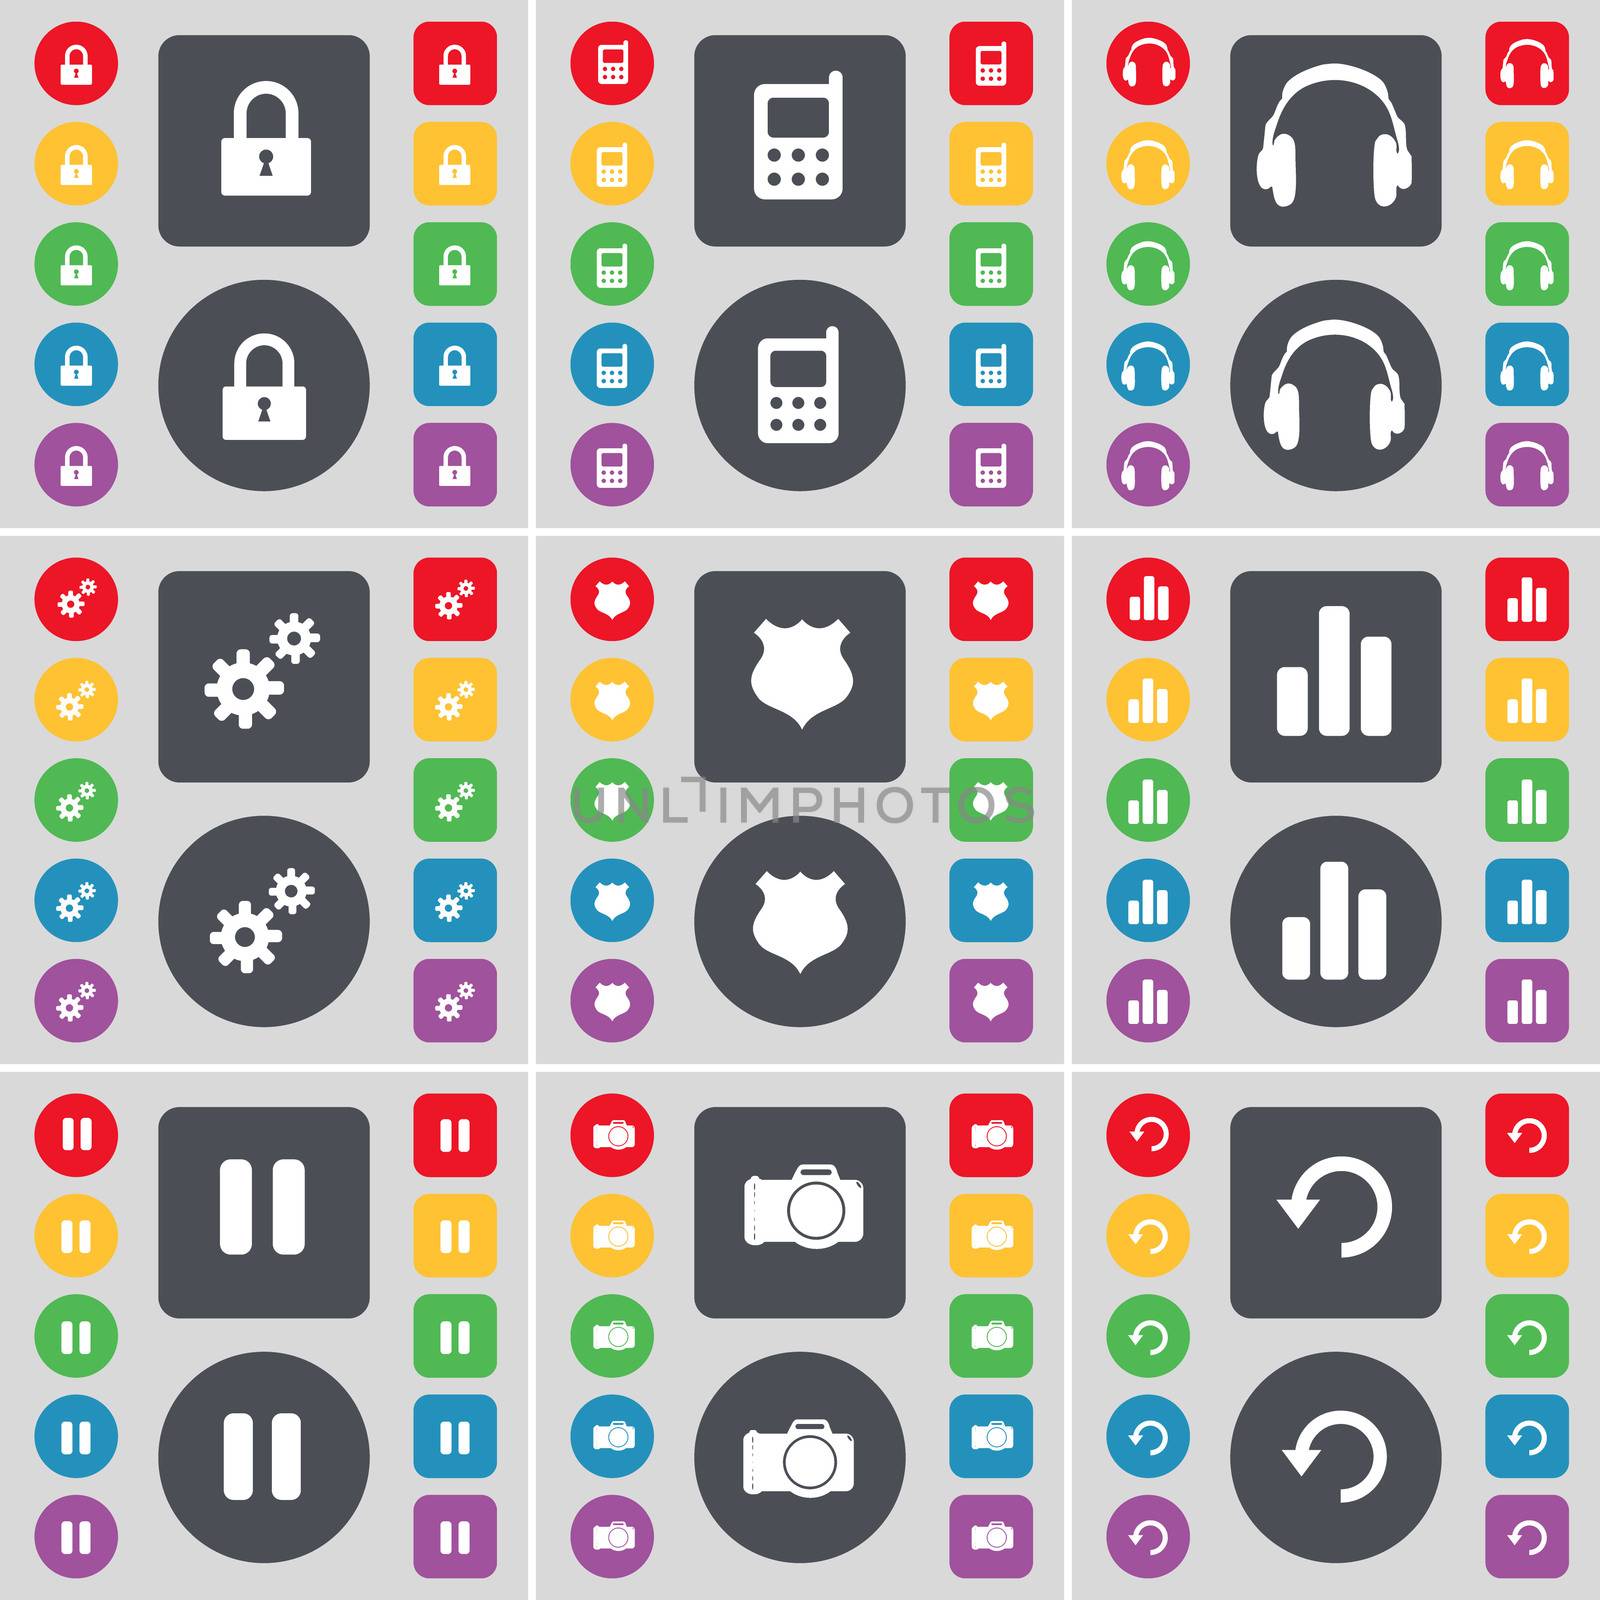 Lock, Mobile phone, Headphones, Gear, Police badge, Diagram, Pause, Camera, Reload icon symbol. A large set of flat, colored buttons for your design. illustration